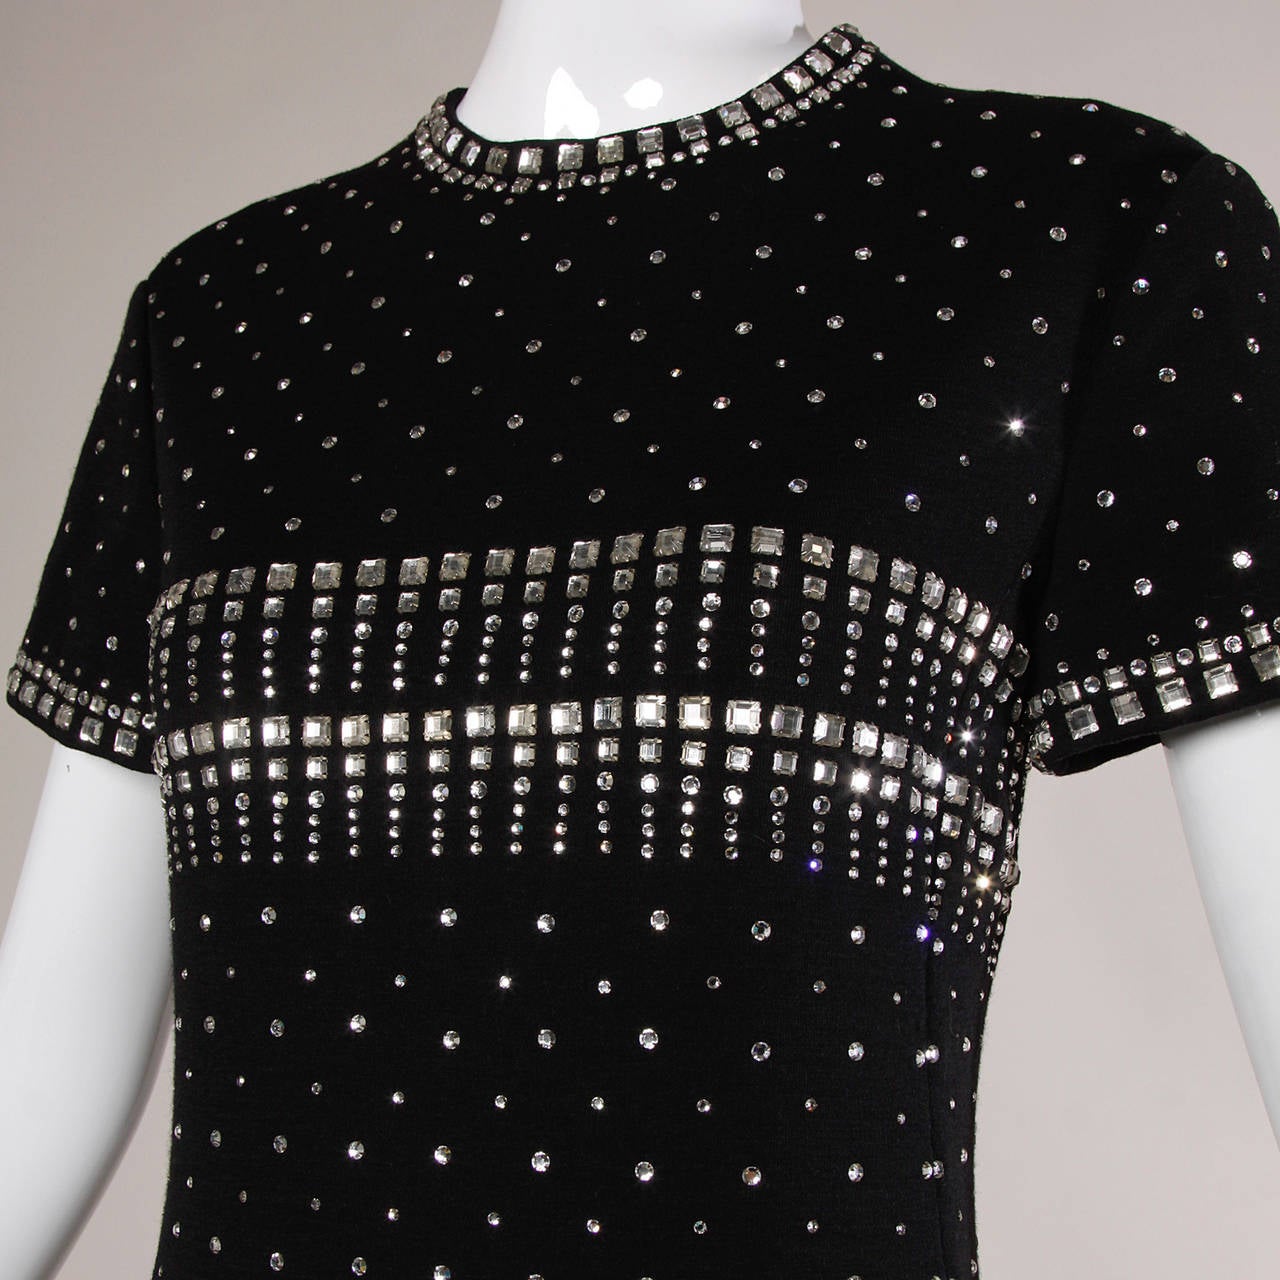 Absolutely stunning vintage Geoffrey Beene black wool knit maxi dress completely encrusted in tiny prong set sparkling rhinestones. This dress is just unbelievable in person and extremely heavy from all the embellishment. Gorgeous construction with